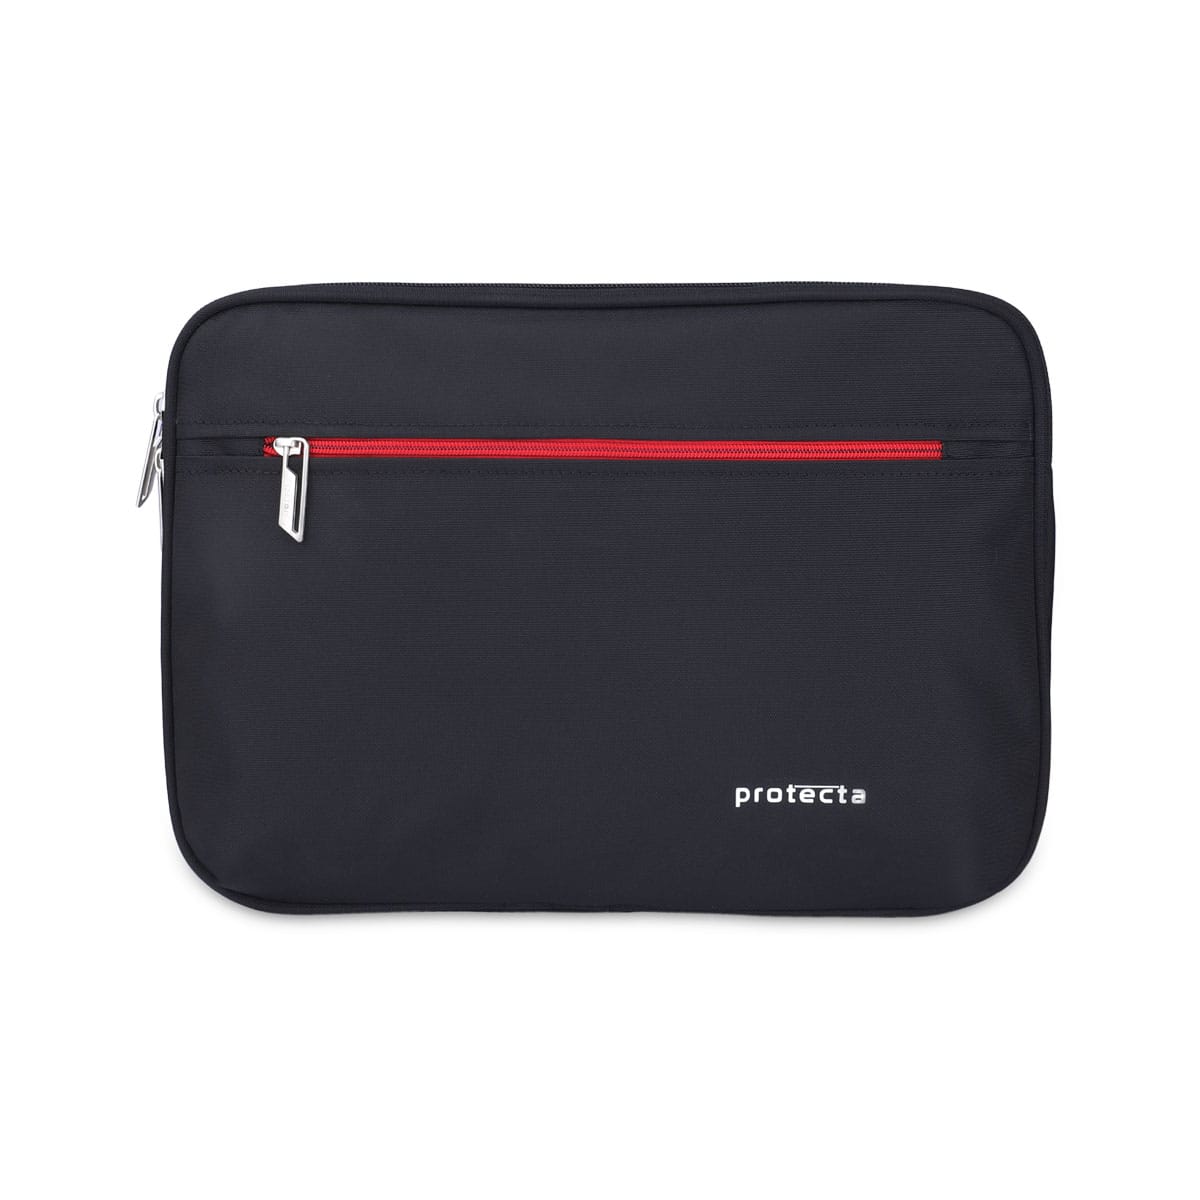 Black-Red | Protecta Staunch Ally MacBook Sleeve-Main